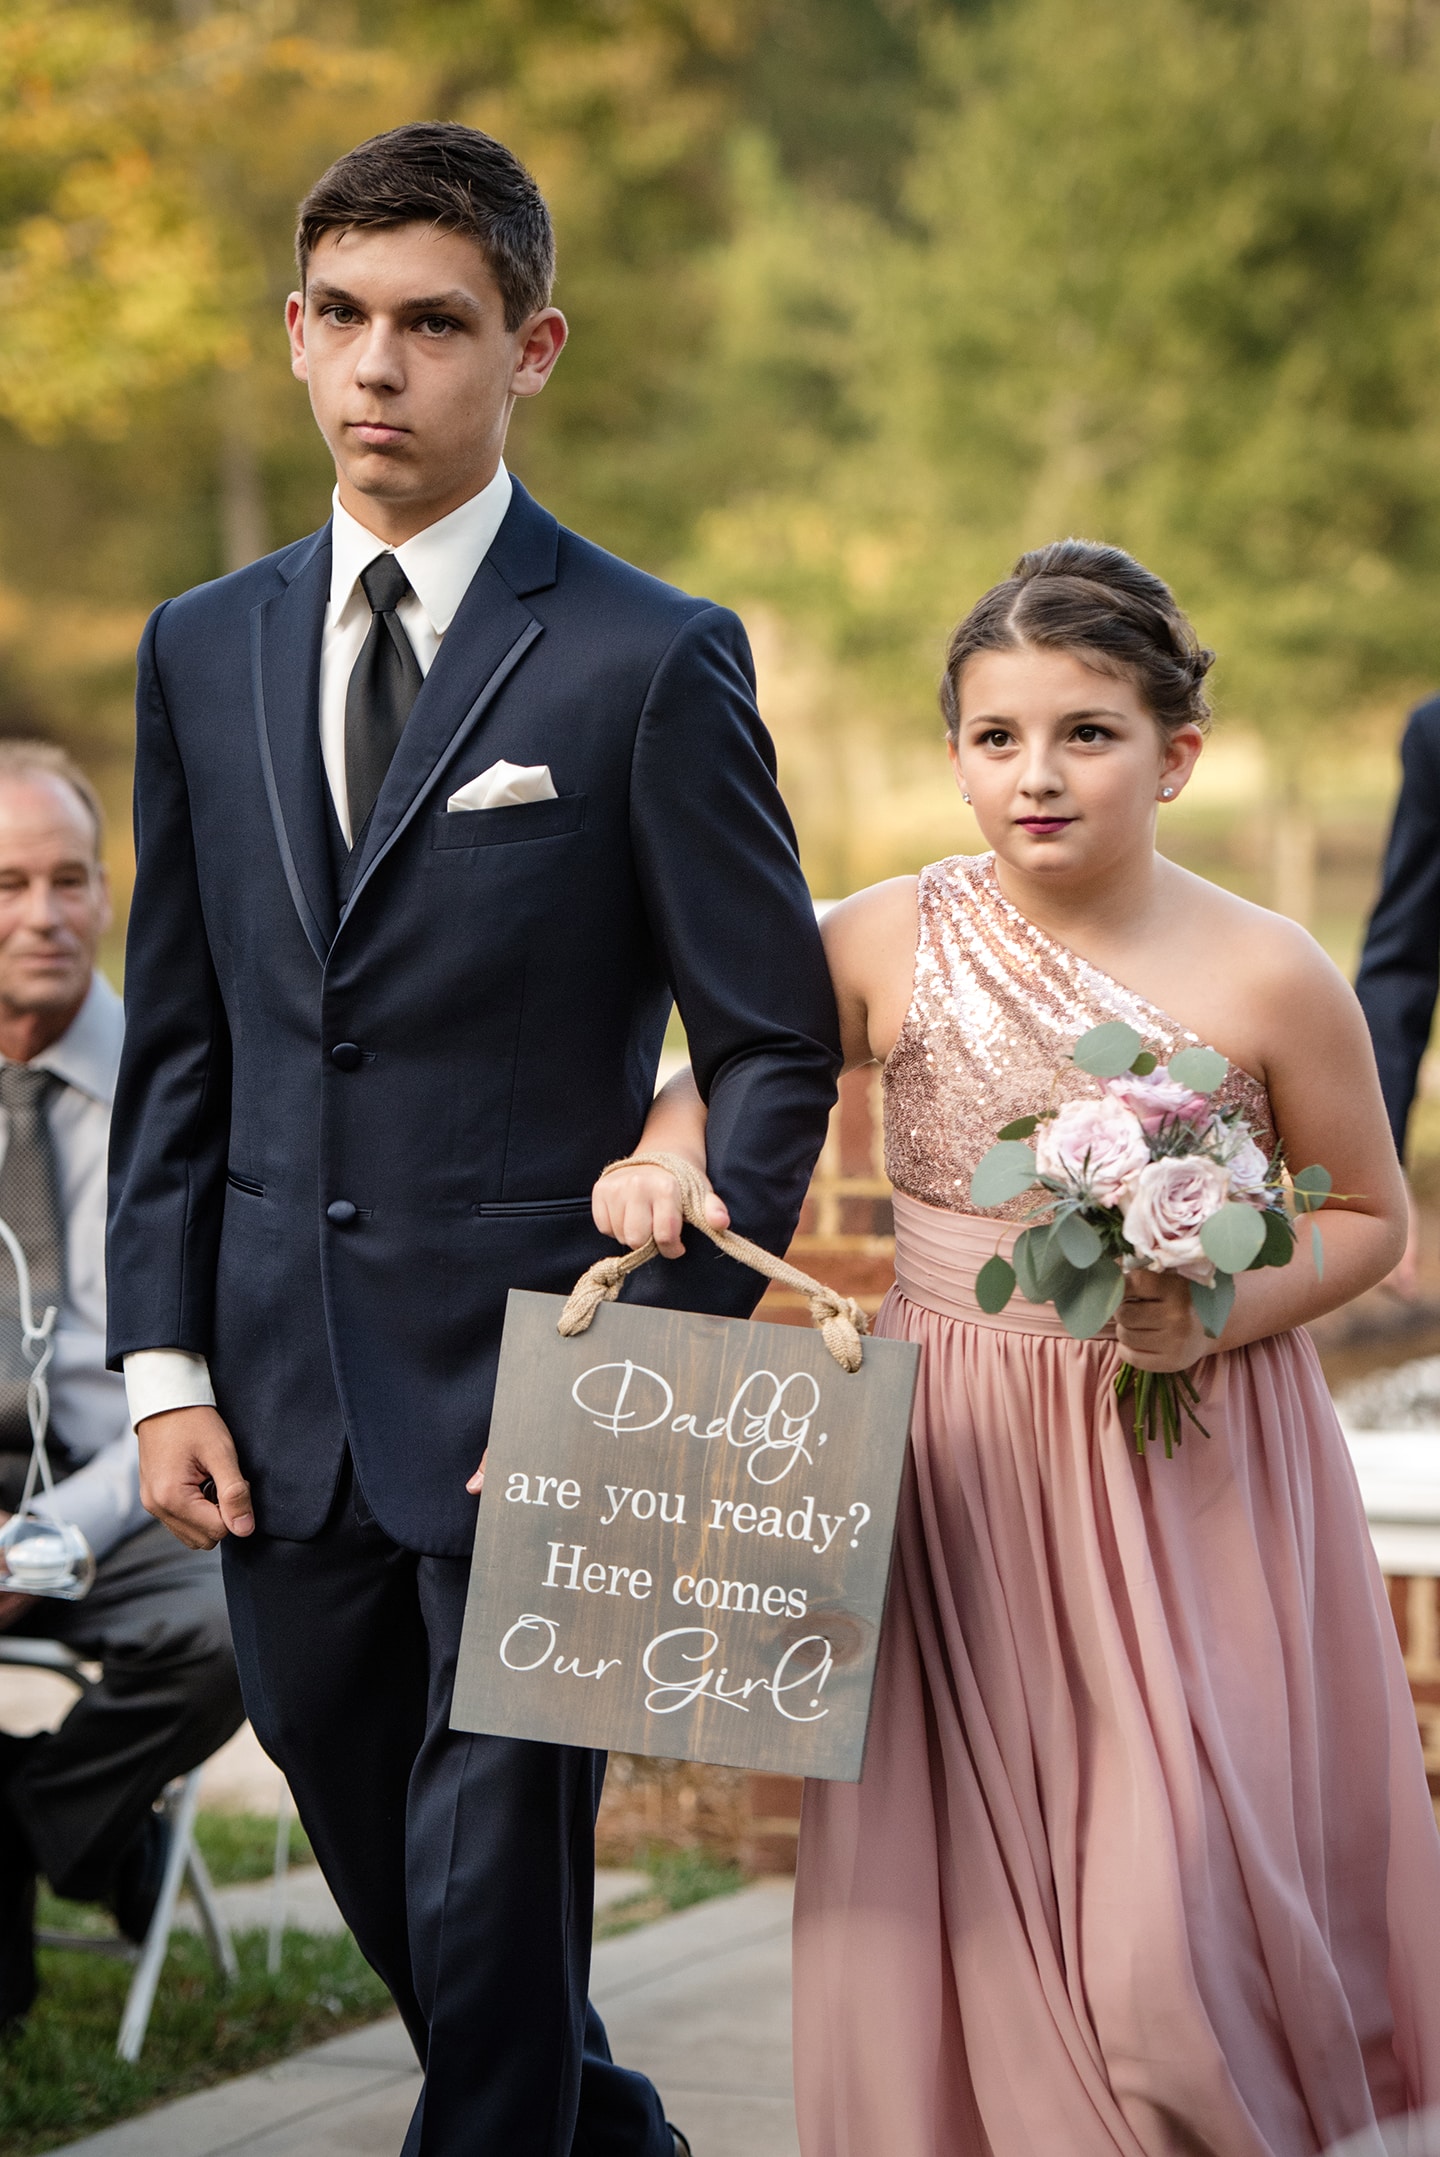 Children at wedding ceremony carrying wedding sign